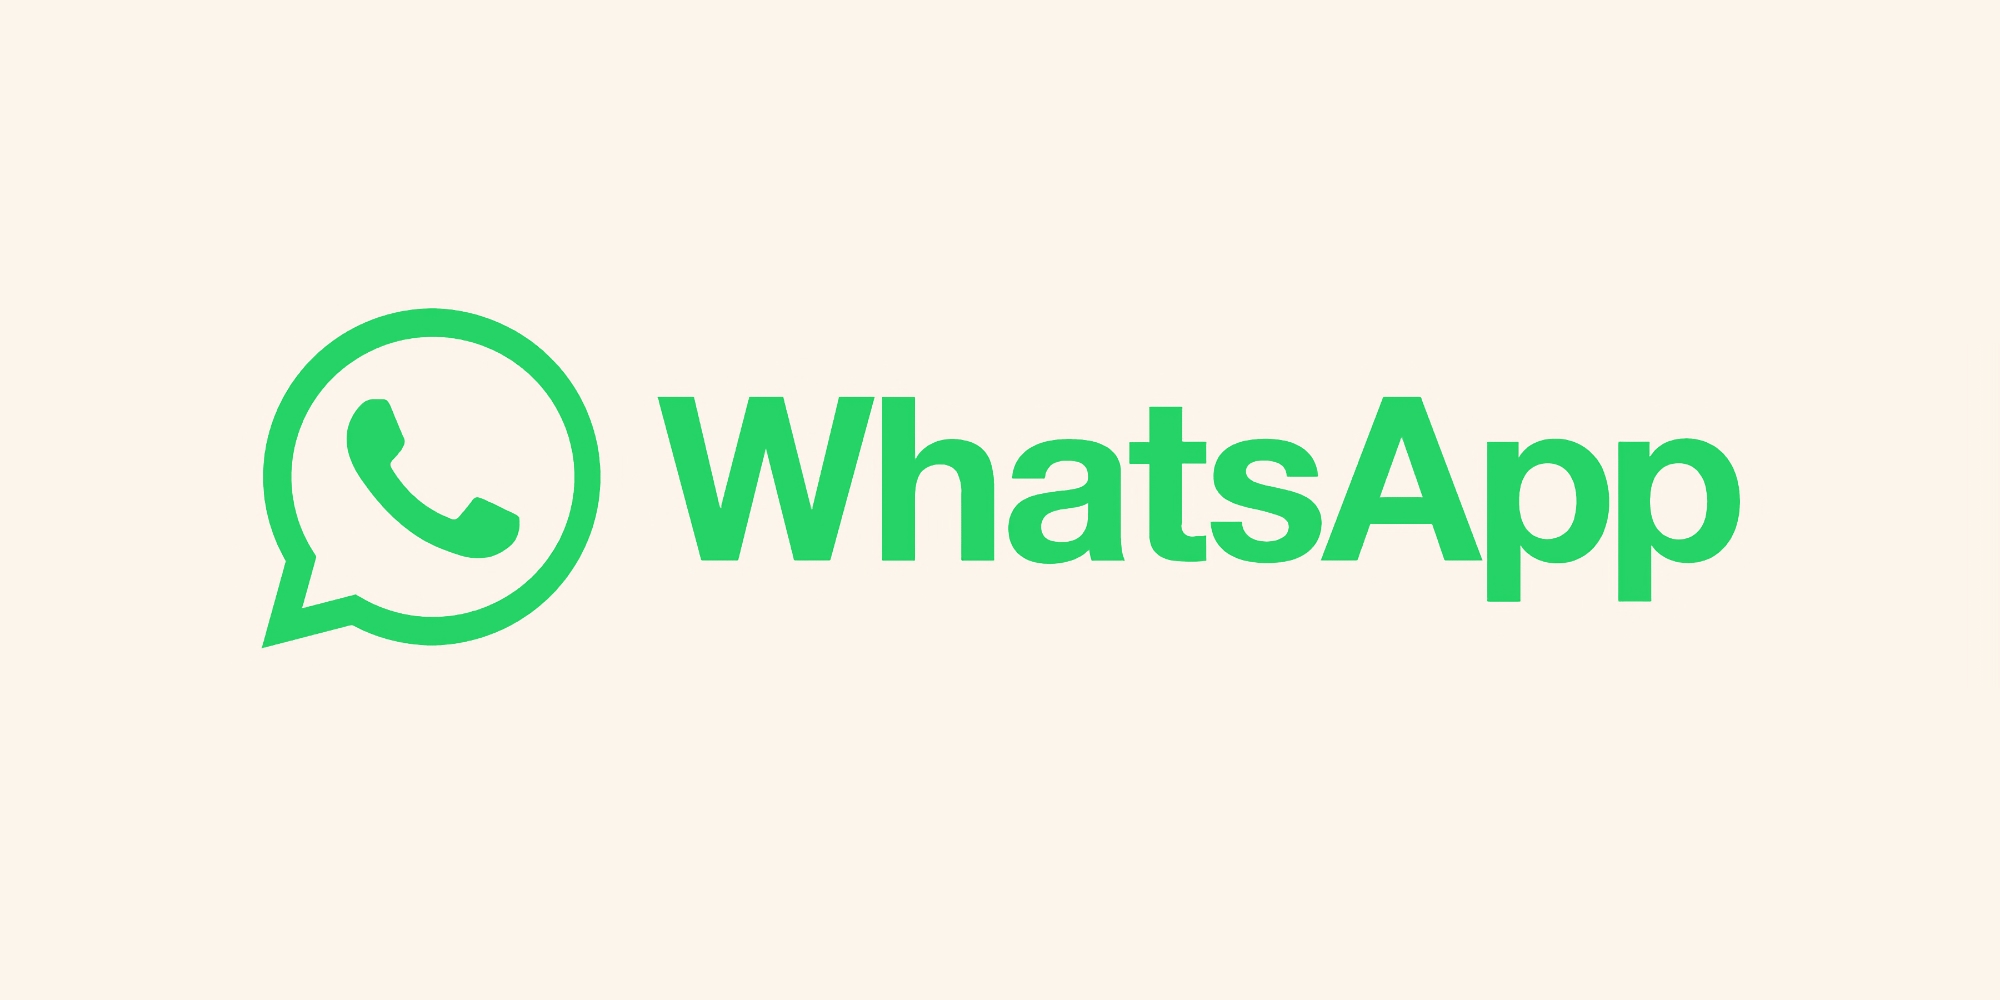 WhatsApp gets dual-panel support on Android tablets